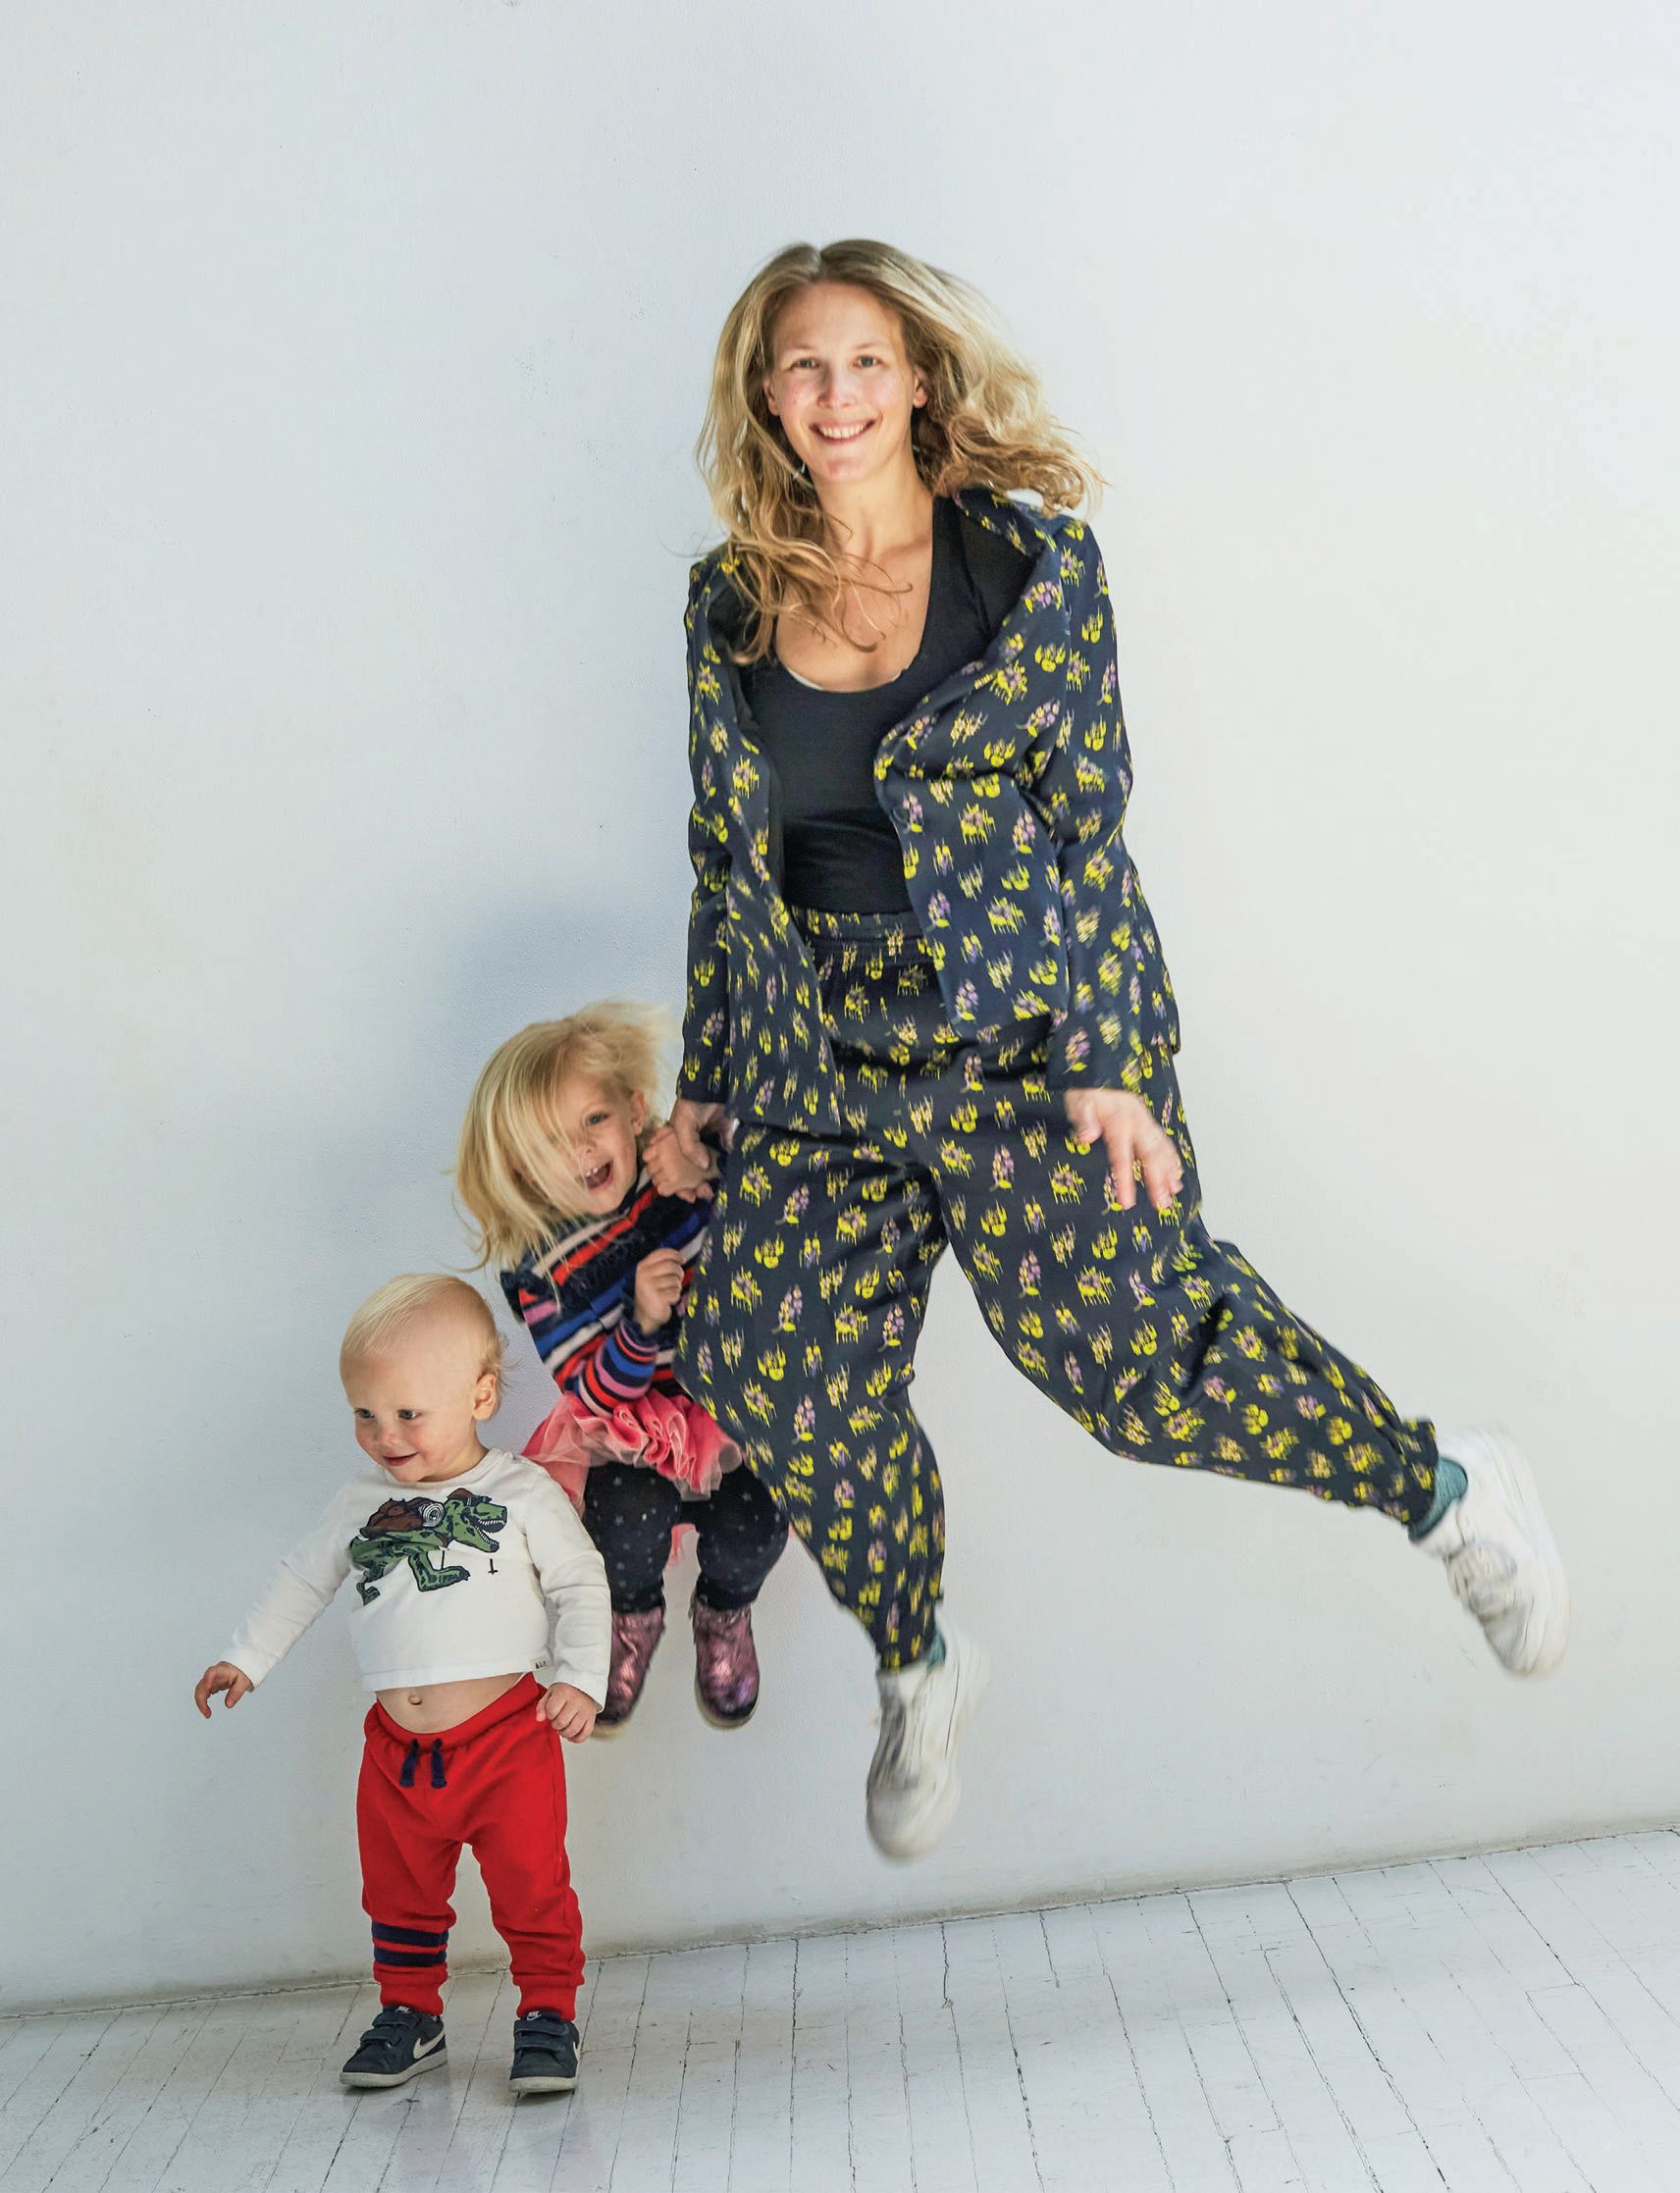 Sophie Elgort with her children Stella and Artie captured by her father, celebrated photographer Arthur Elgort PHOTO BY ARTHUR ELGORT/COURTESY OF SOPHIE ELGORT